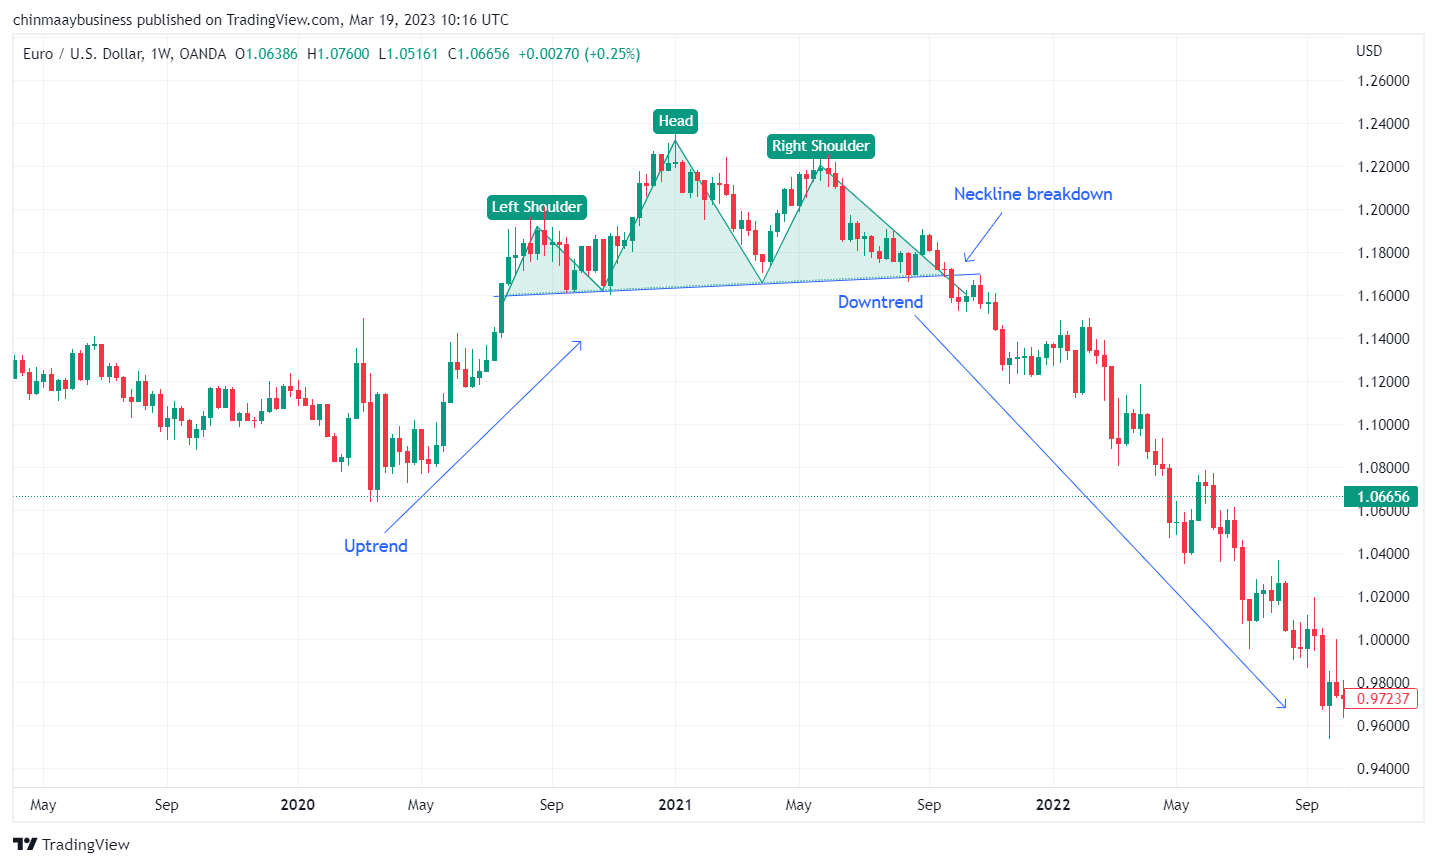 The Head and Shoulders pattern